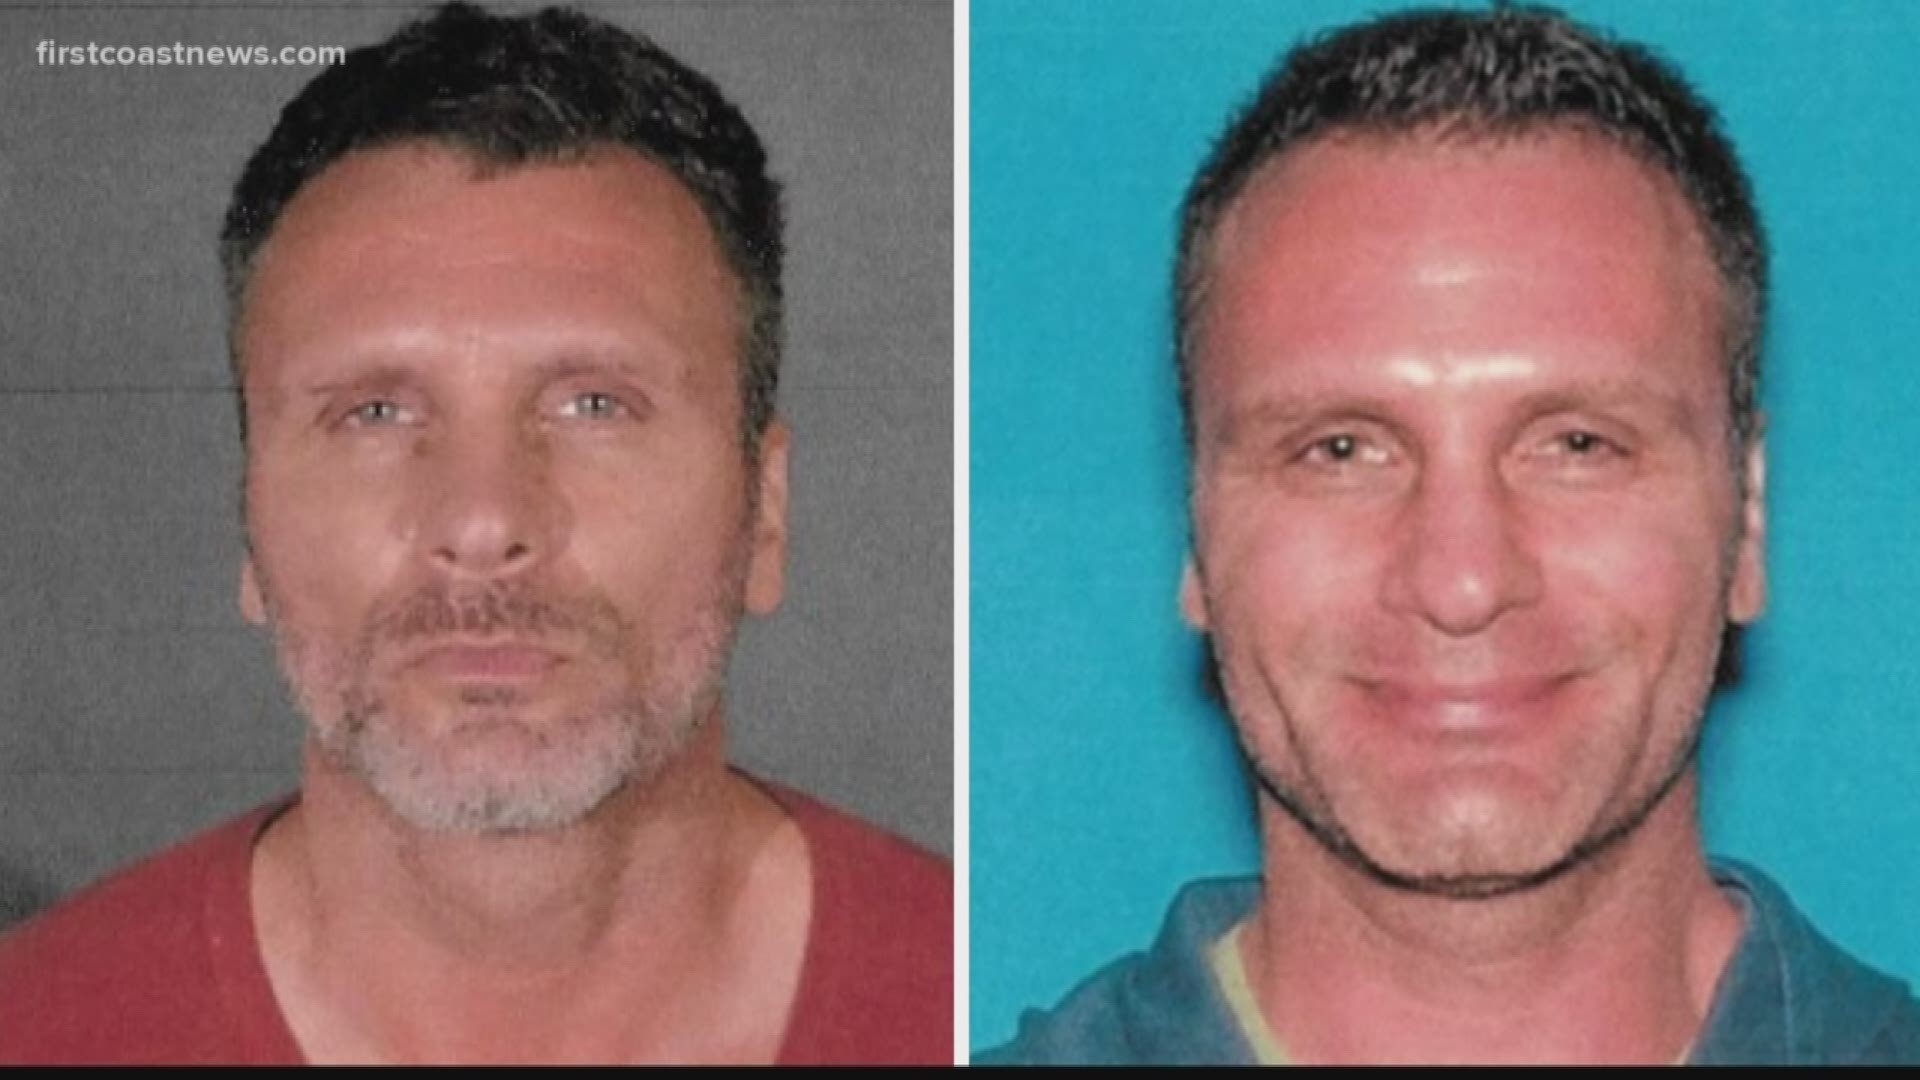 Greg Alyn Carlson, a believed to be 46-year-old man seen in Jacksonville in 2017, has been added to the FBI's Ten Most Wanted Fugitives list.